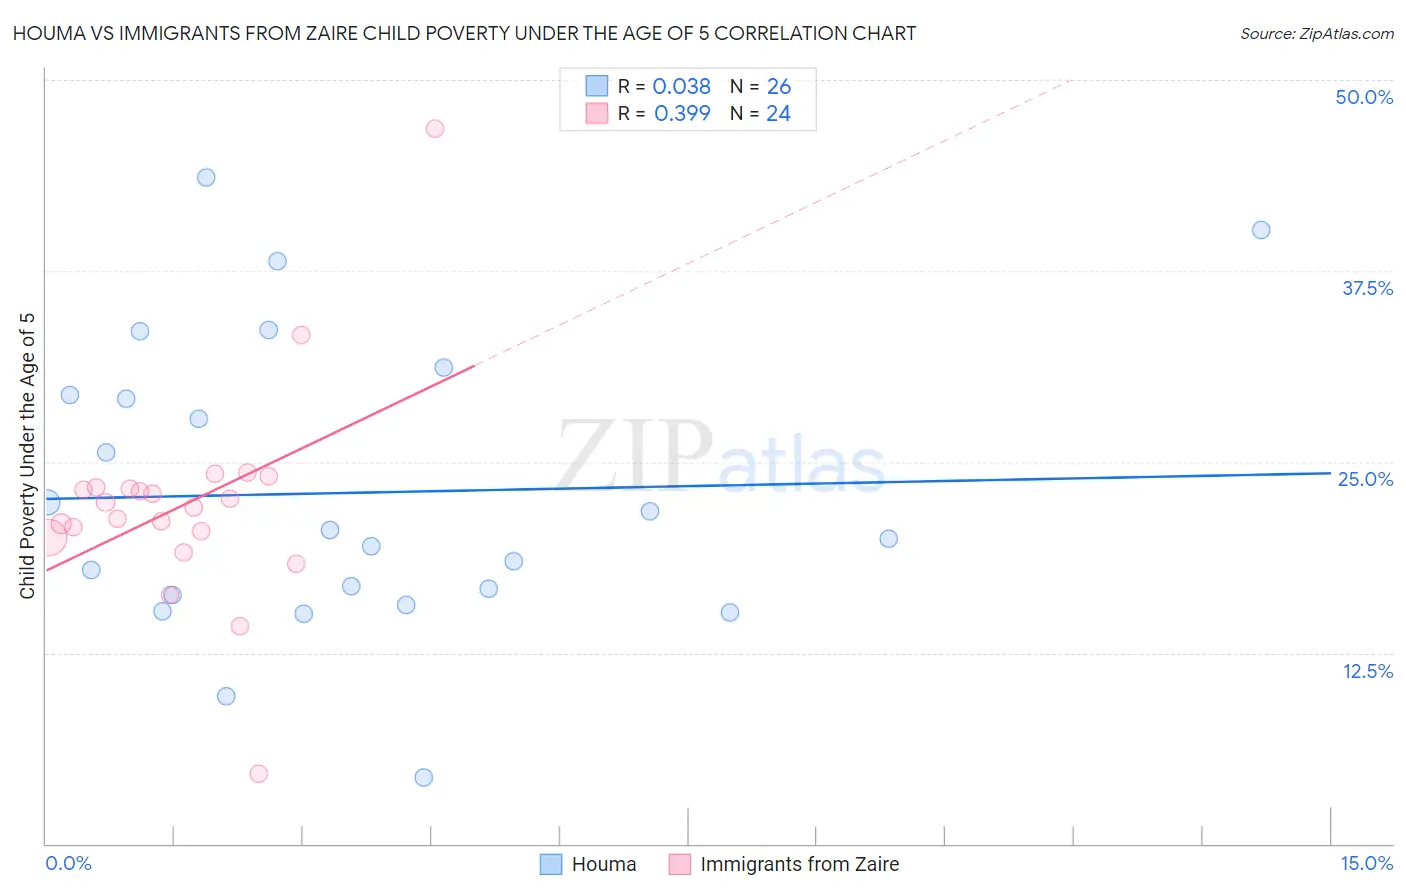 Houma vs Immigrants from Zaire Child Poverty Under the Age of 5